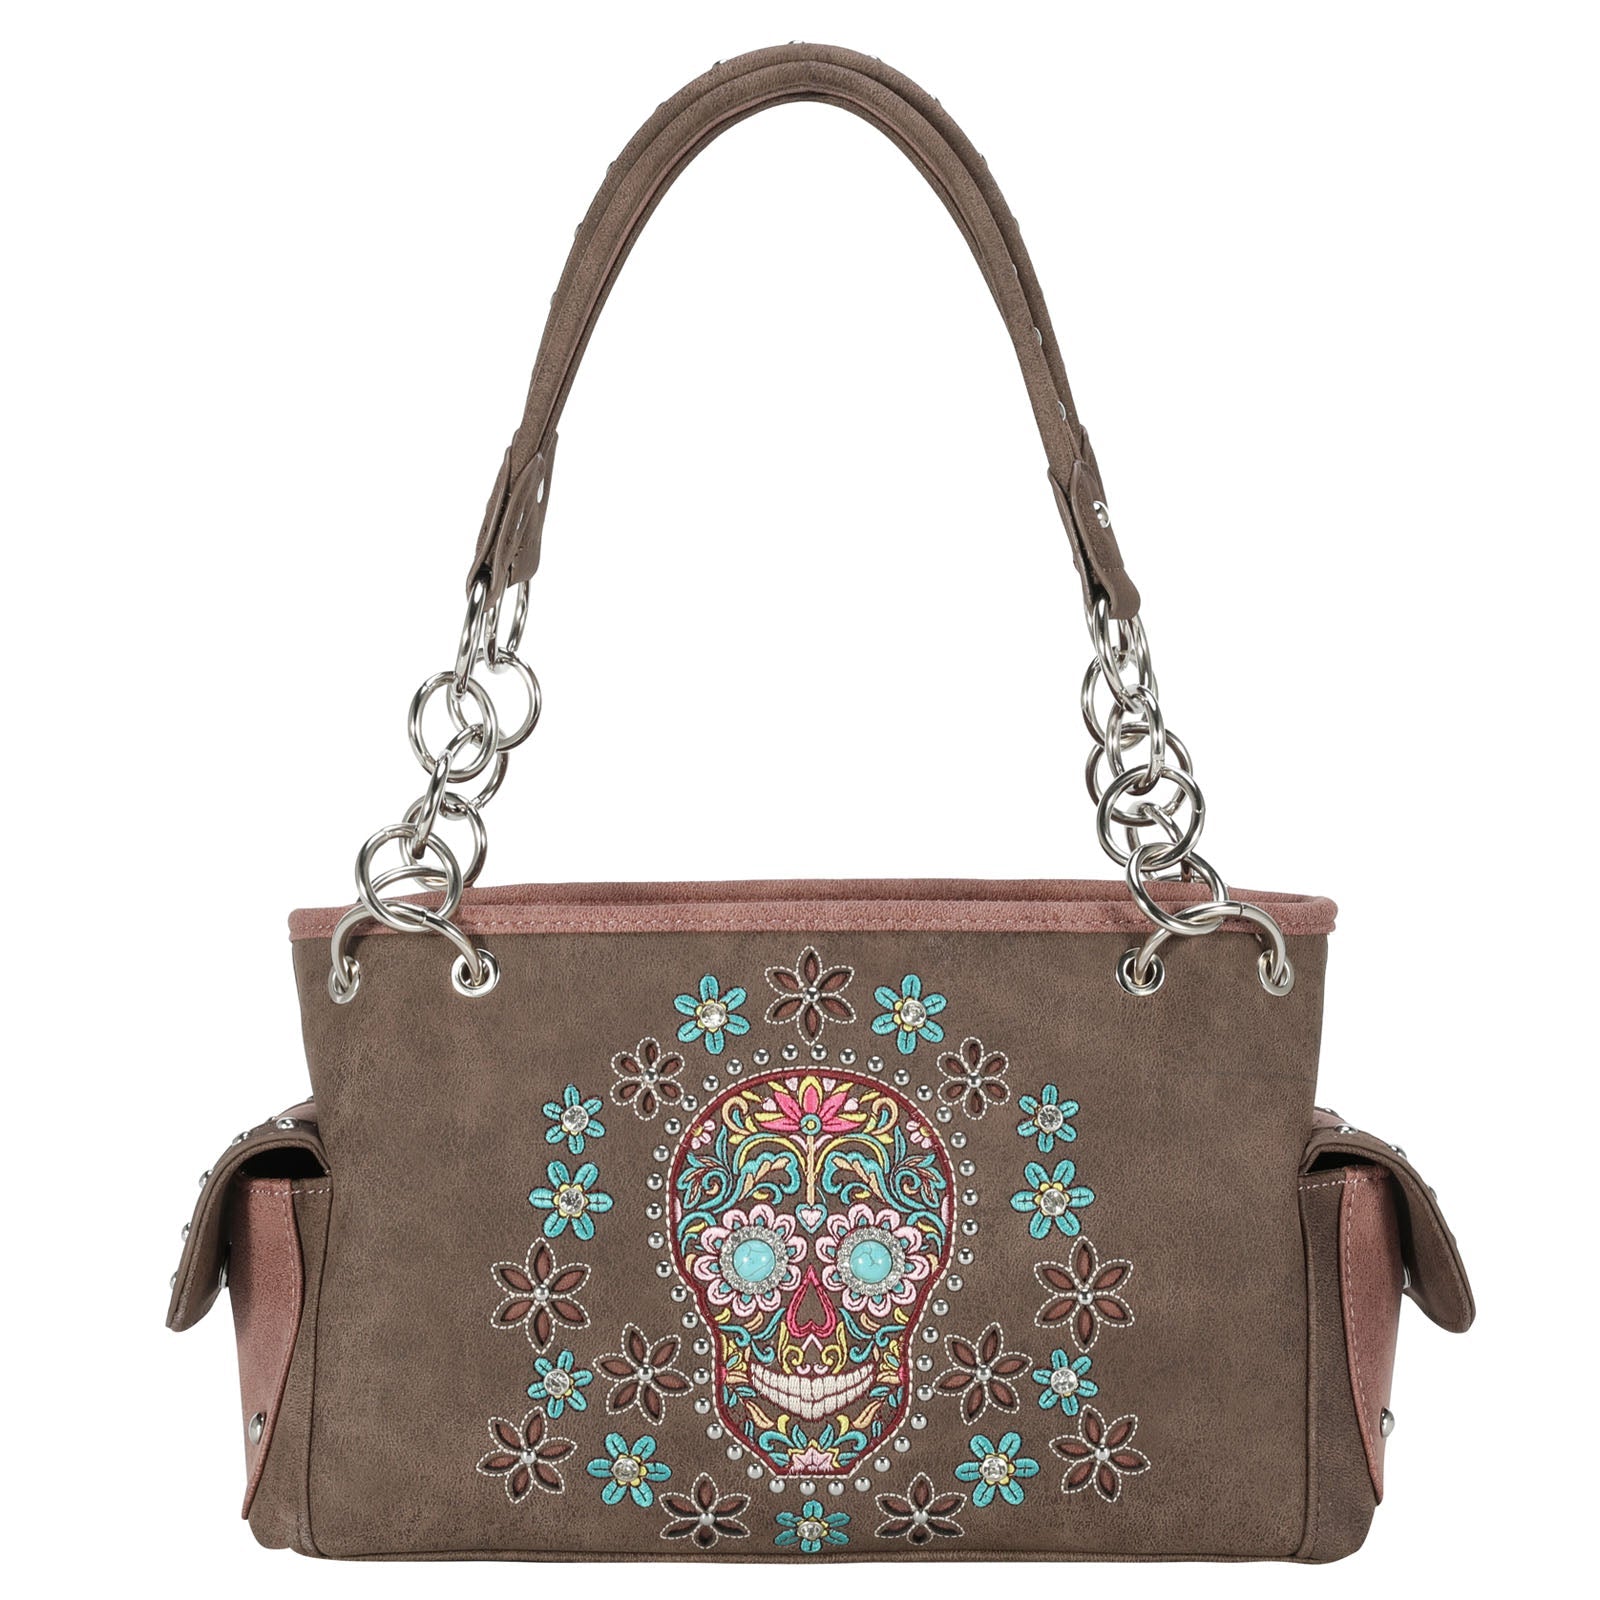 Montana West Sugar Skull Collection Concealed Carry Satchel - Cowgirl Wear